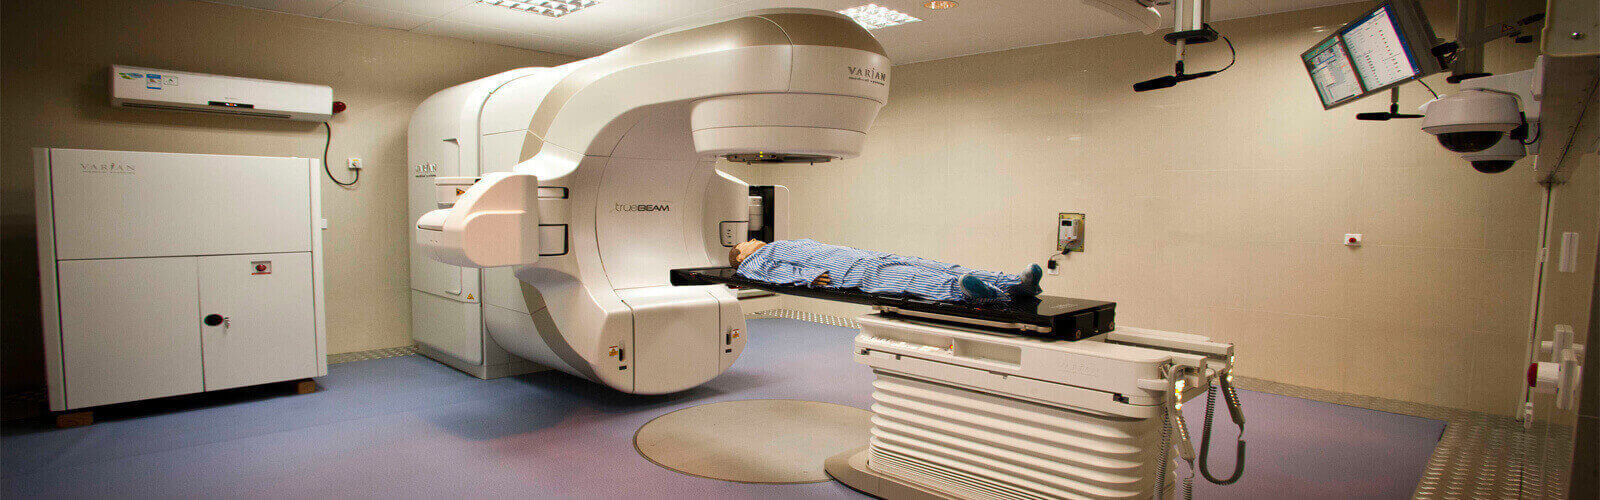 Radiotherapy in Nigeria